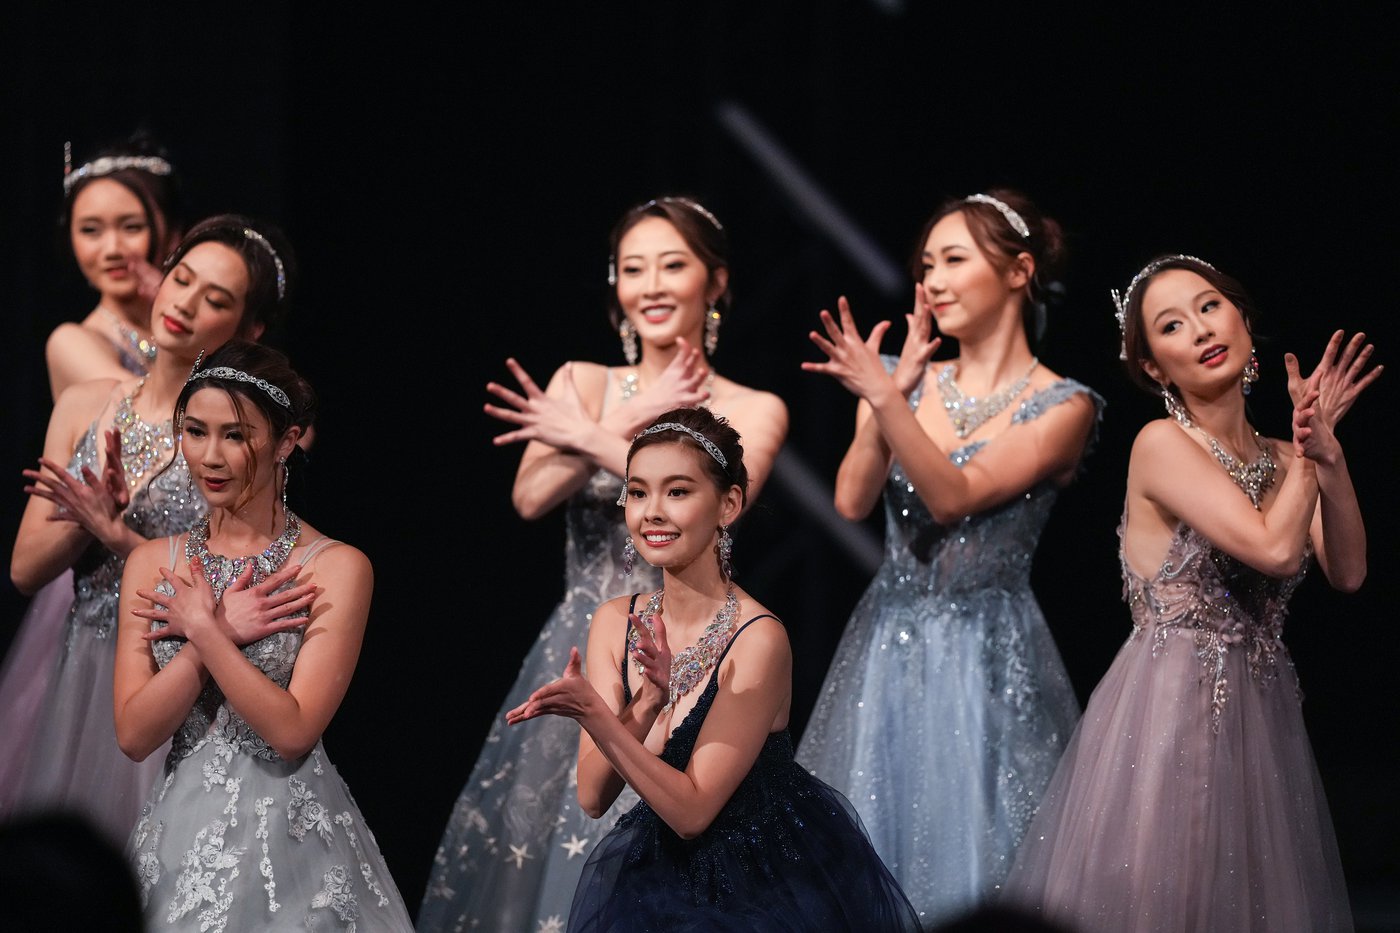 Dreams of Chinese fame persist at Vancouver pageant, where stars are born